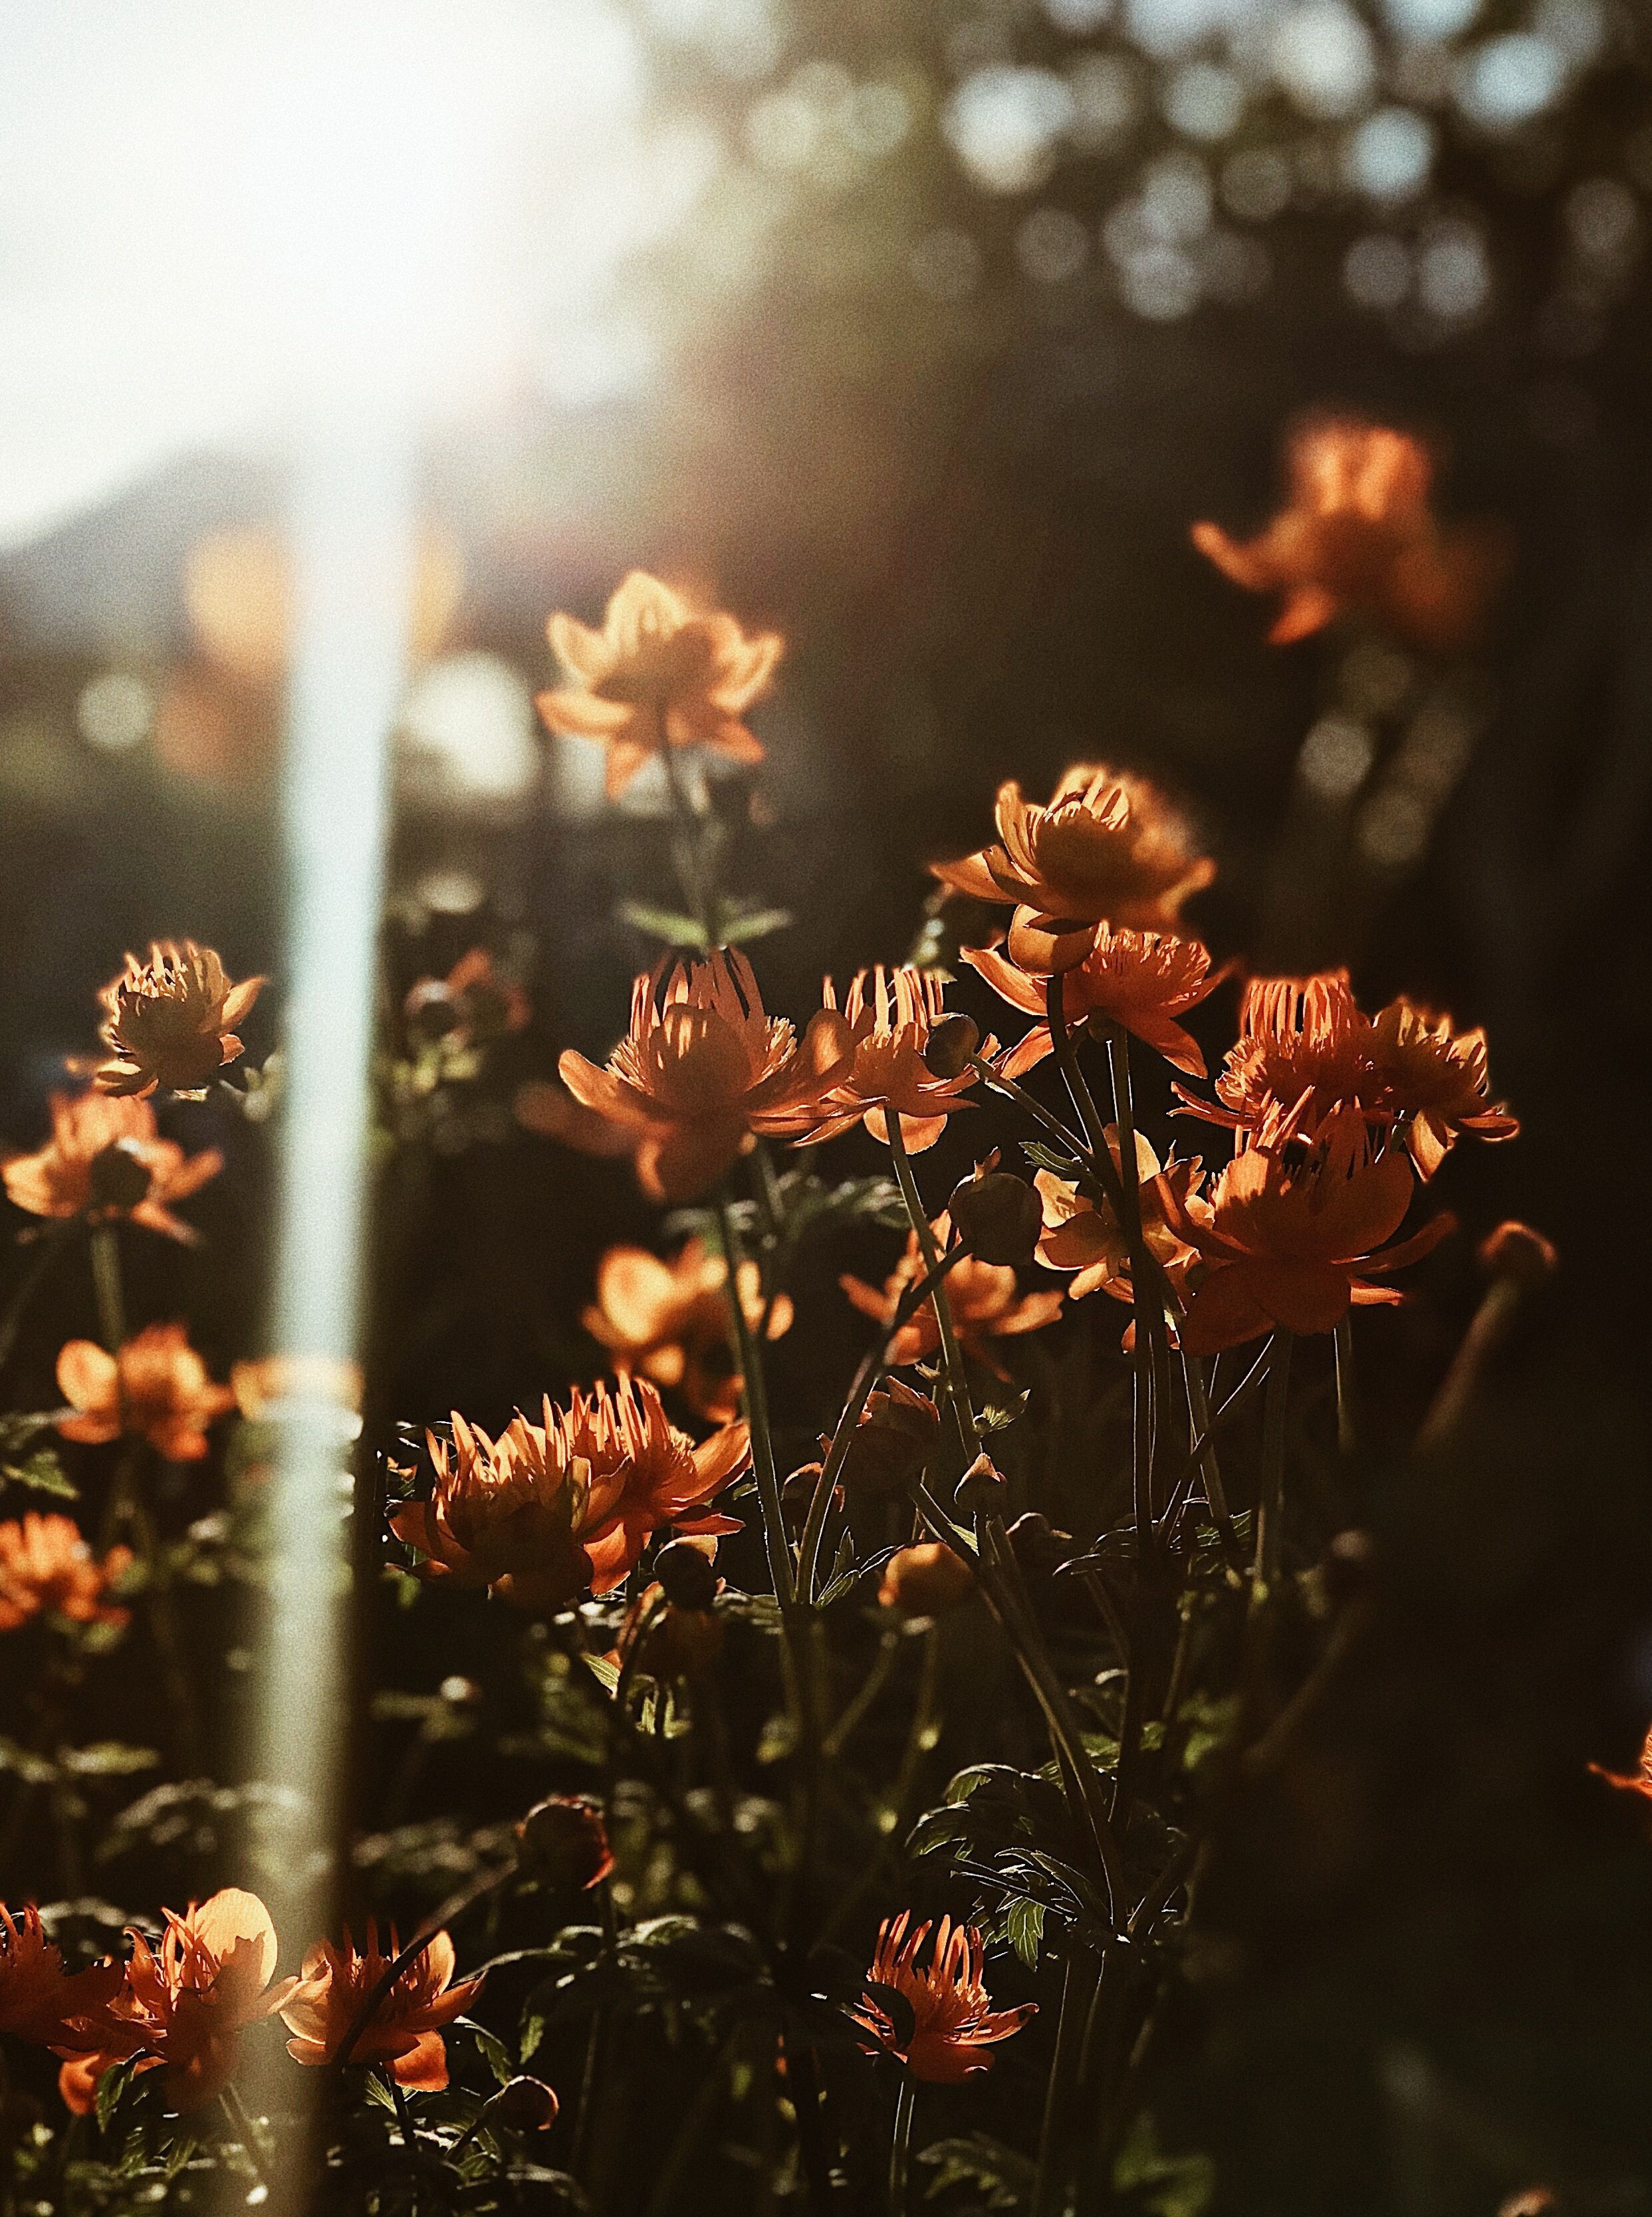 A sun shining through some flowers in the background - Spring